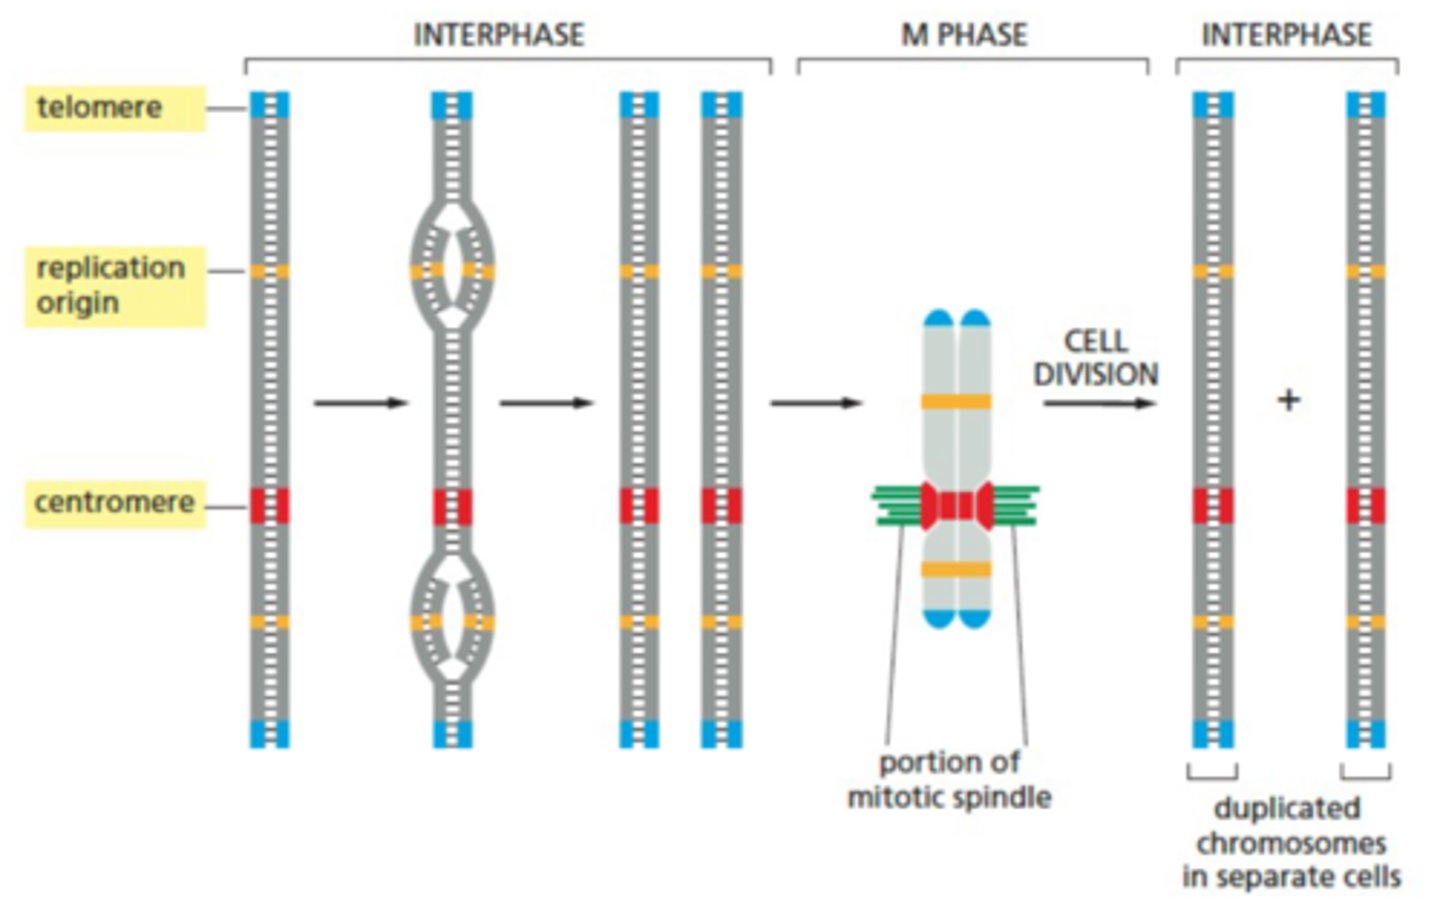 <p>- Telomeres: located at the end of a chromosome, these regions contain repeated nucleotide sequences that enable the ends to be replicated</p><p>- Centromeres: dense, central region of a chromosome that anchors the pairs for separation during mitosis</p>